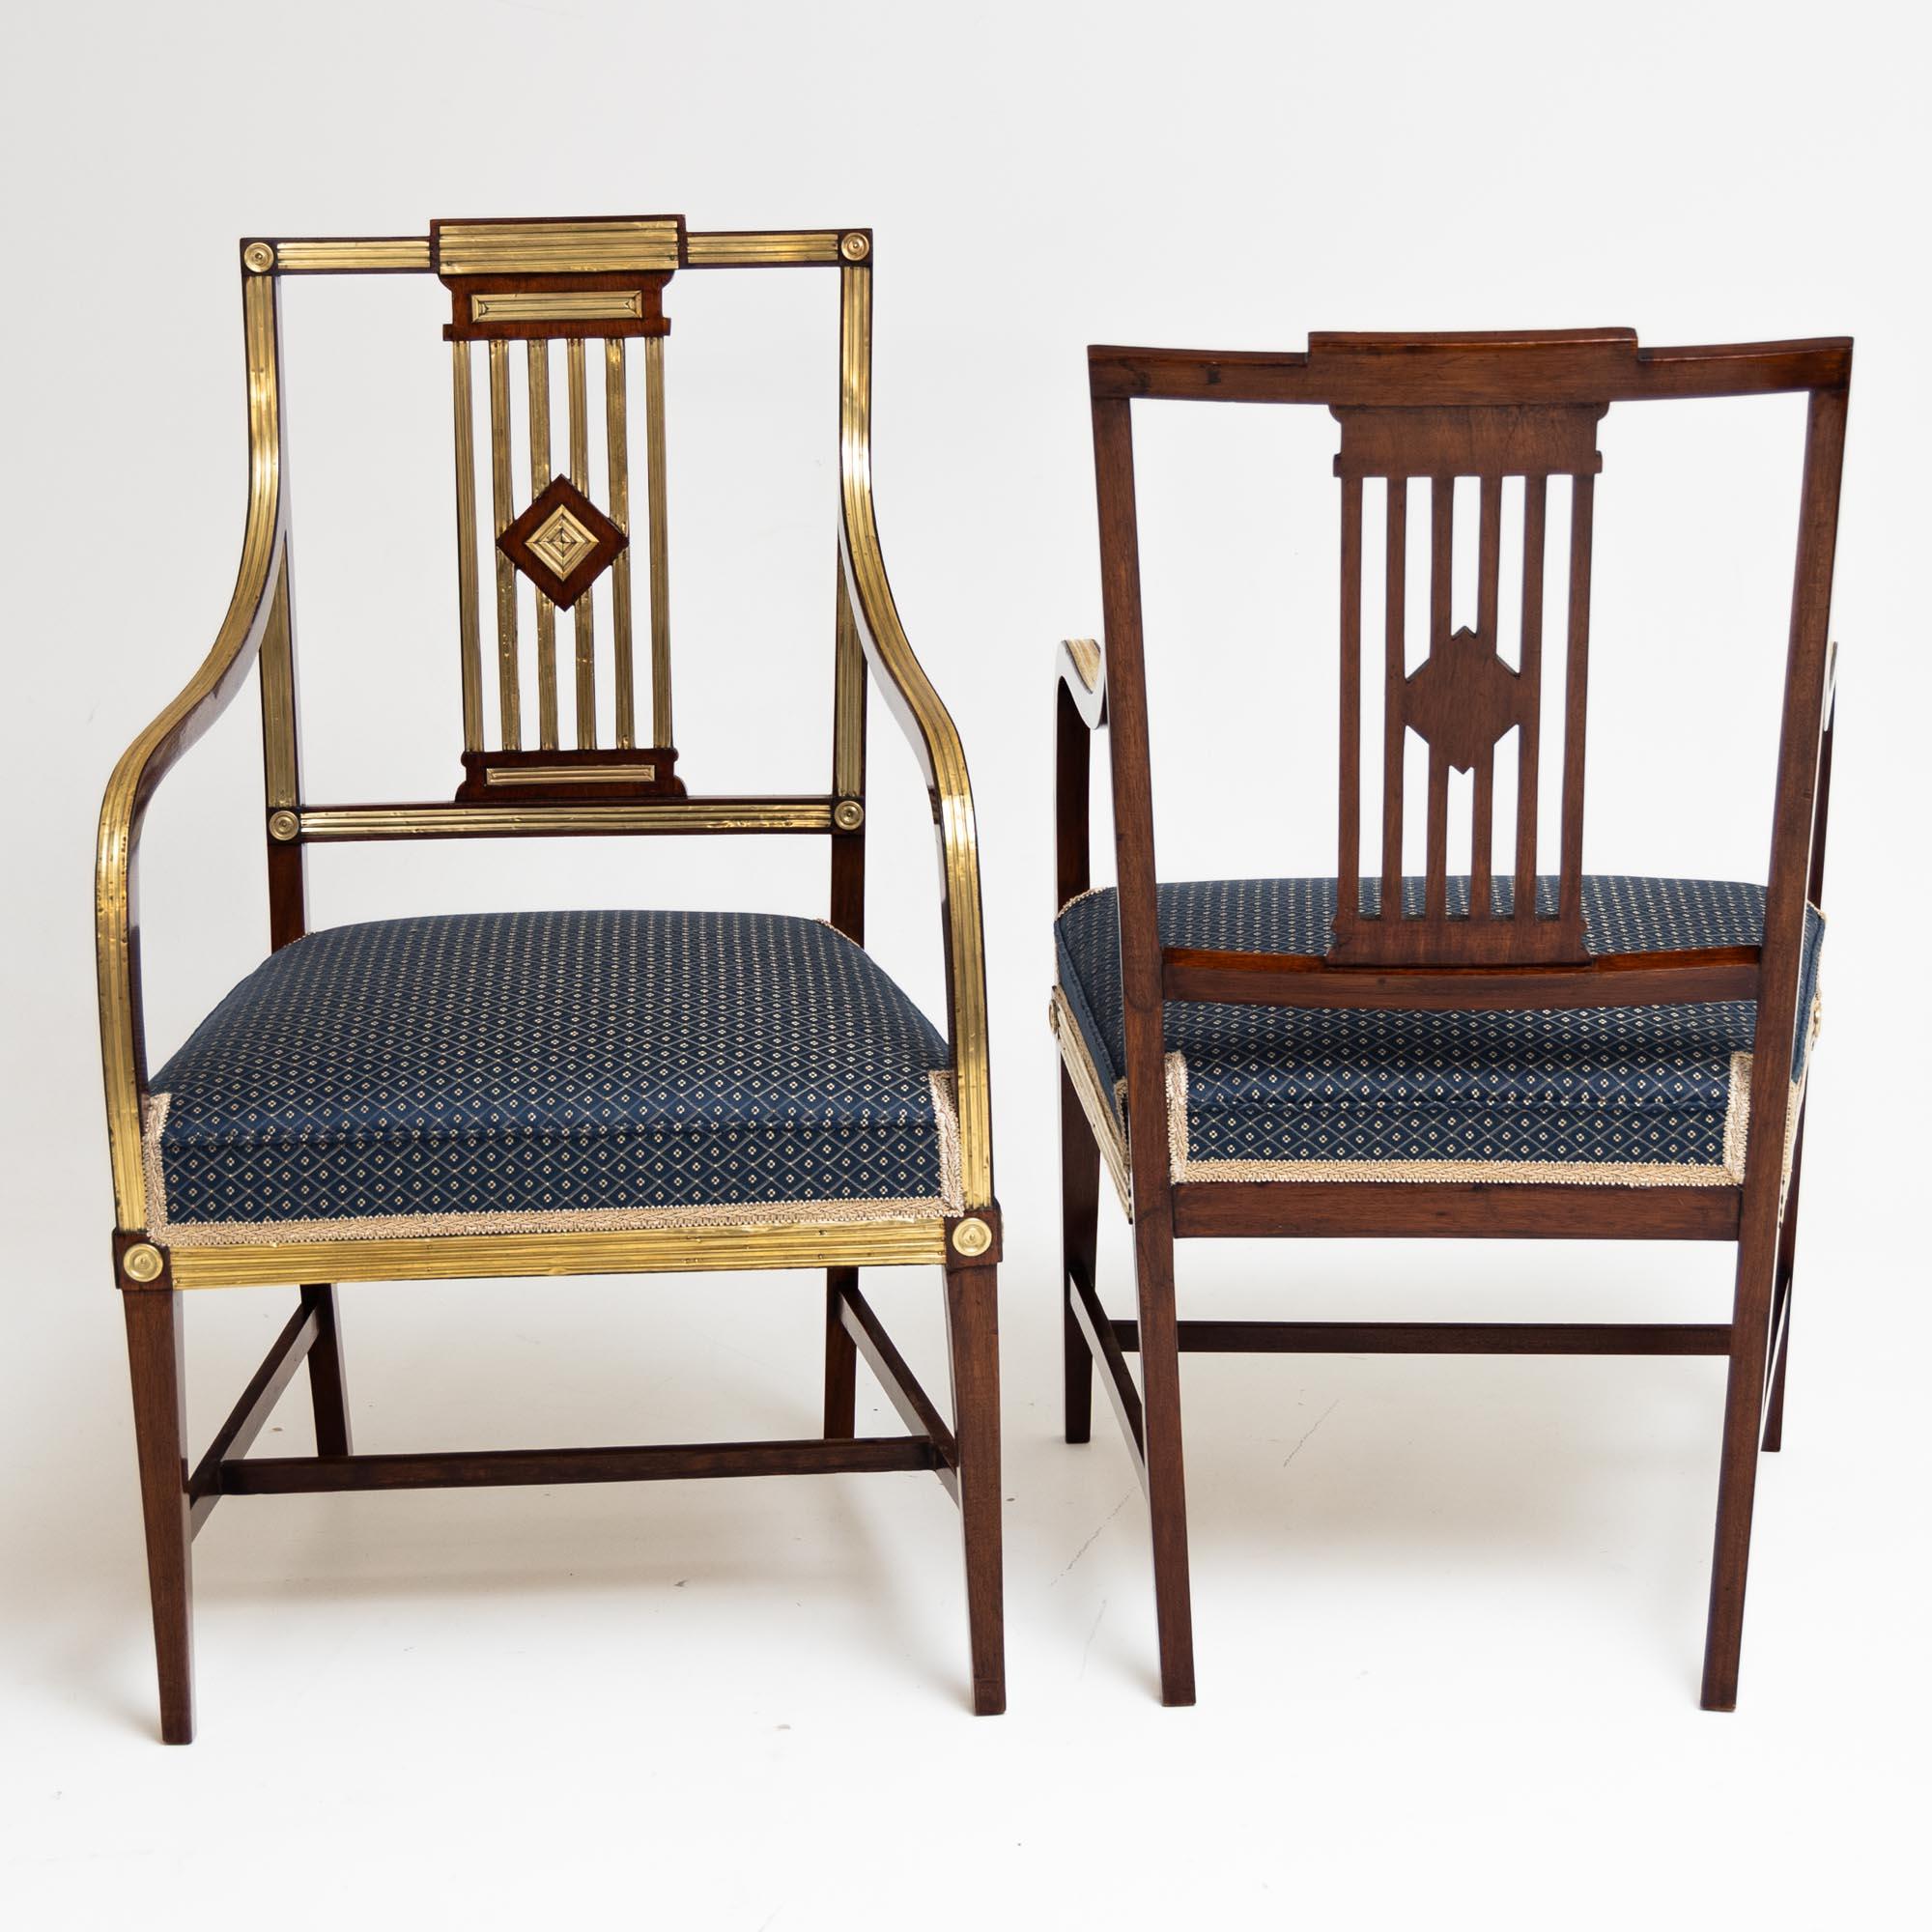 Pair of Neoclassical Dining Room Chairs, Brass, Baltic States, Late 18th Century 4